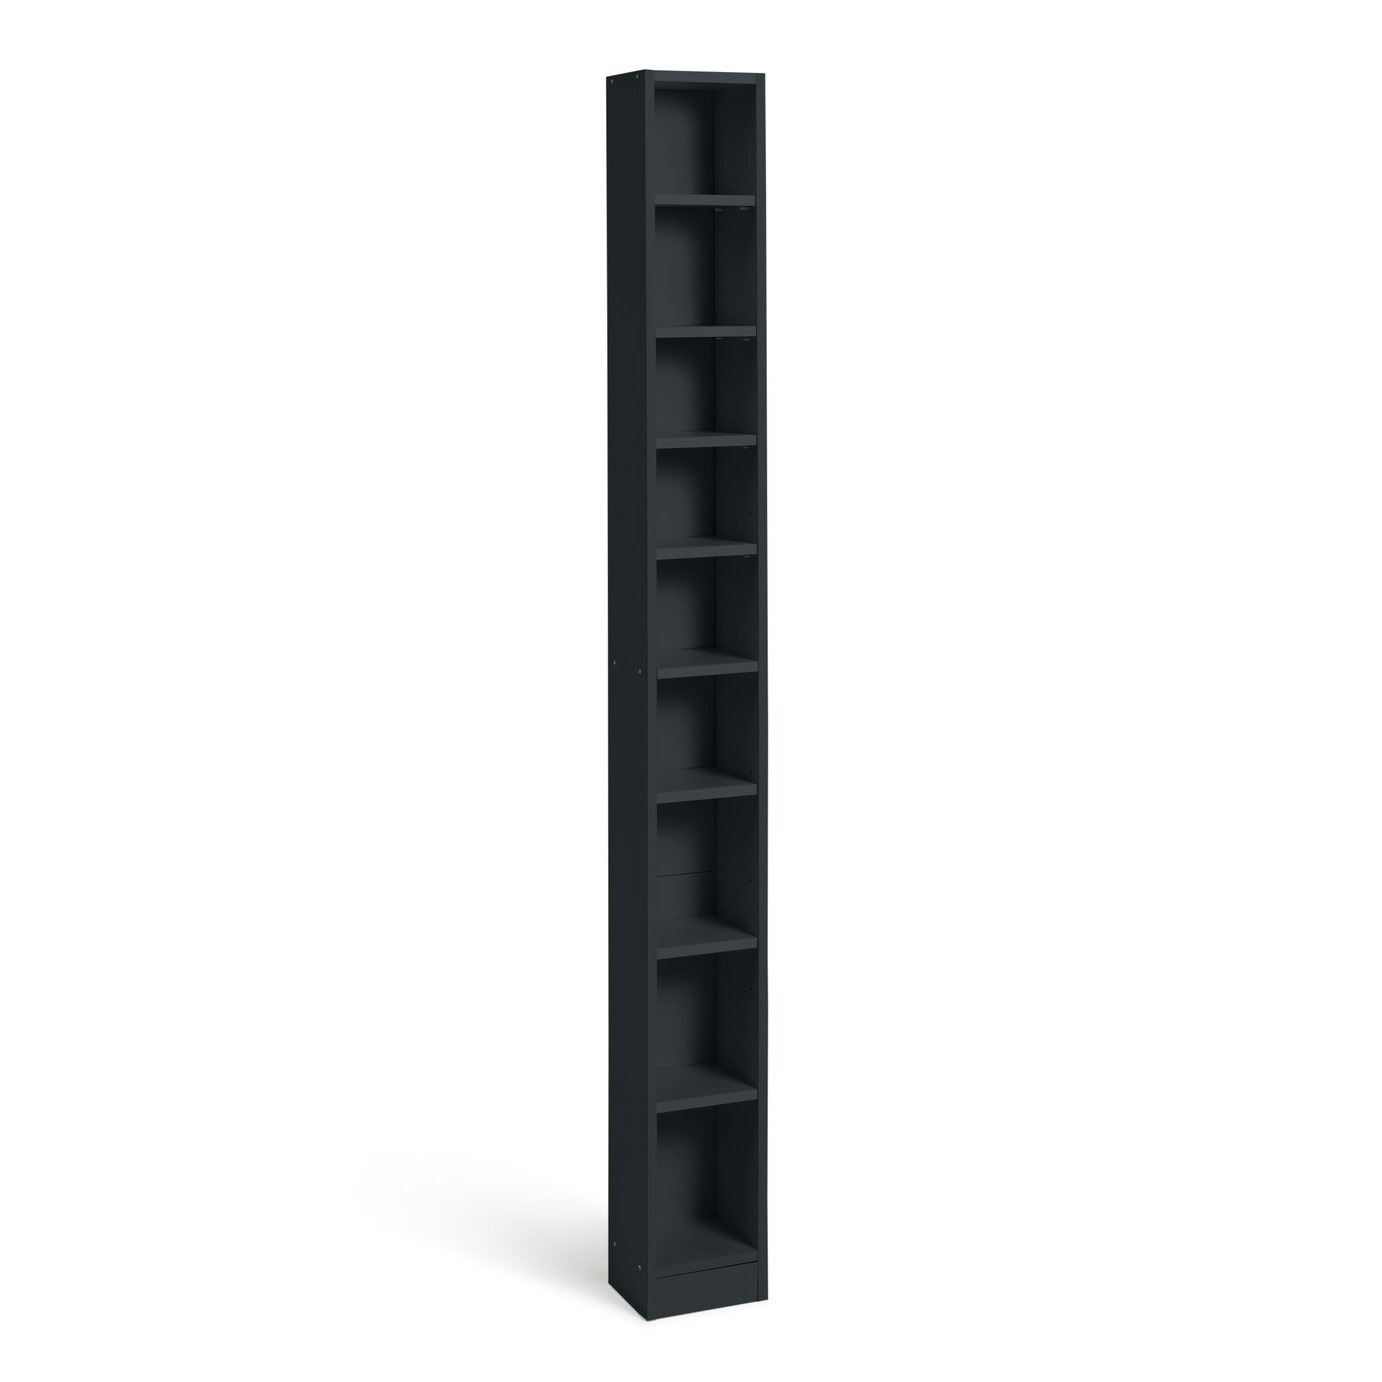 Argos Home Maine Tall CD and DVD Storage unit - Black - image 1